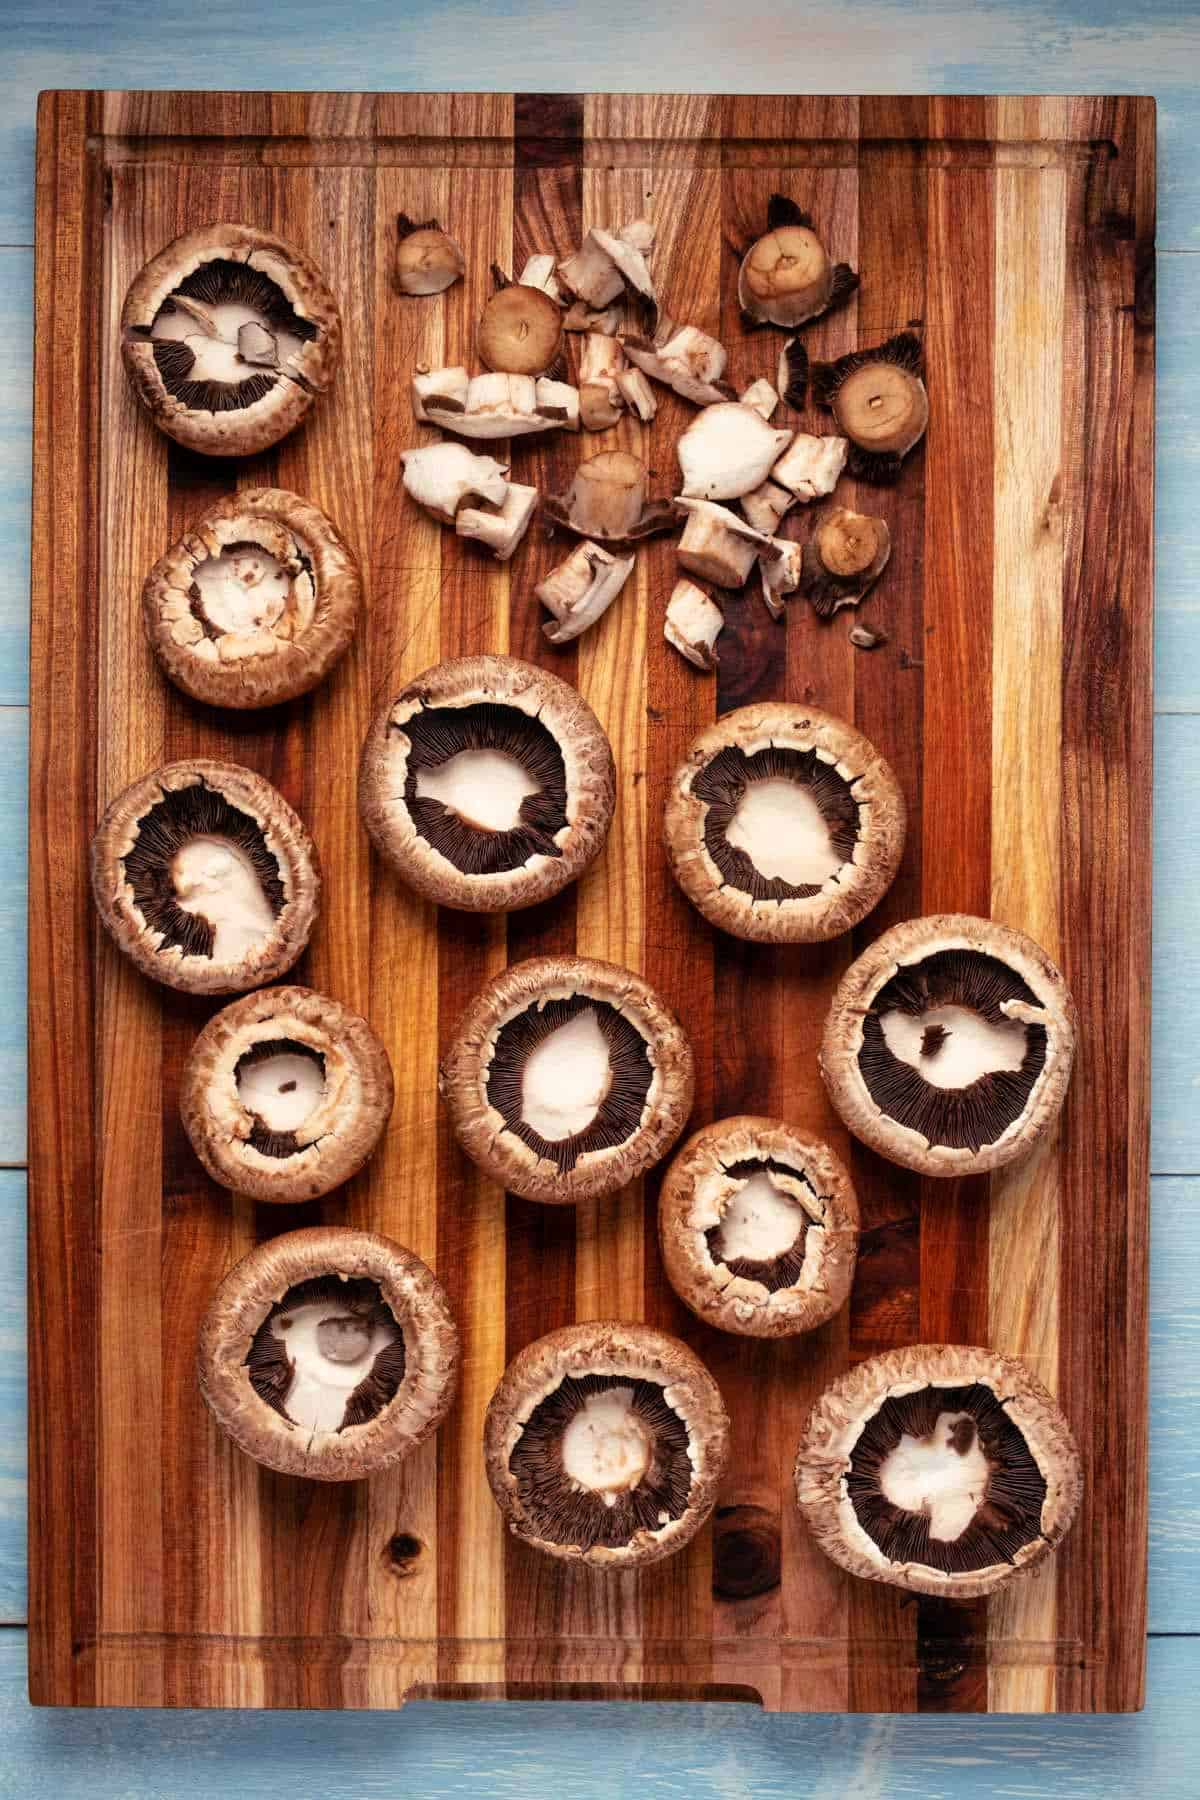 Large mushrooms on a wooden cutting board.